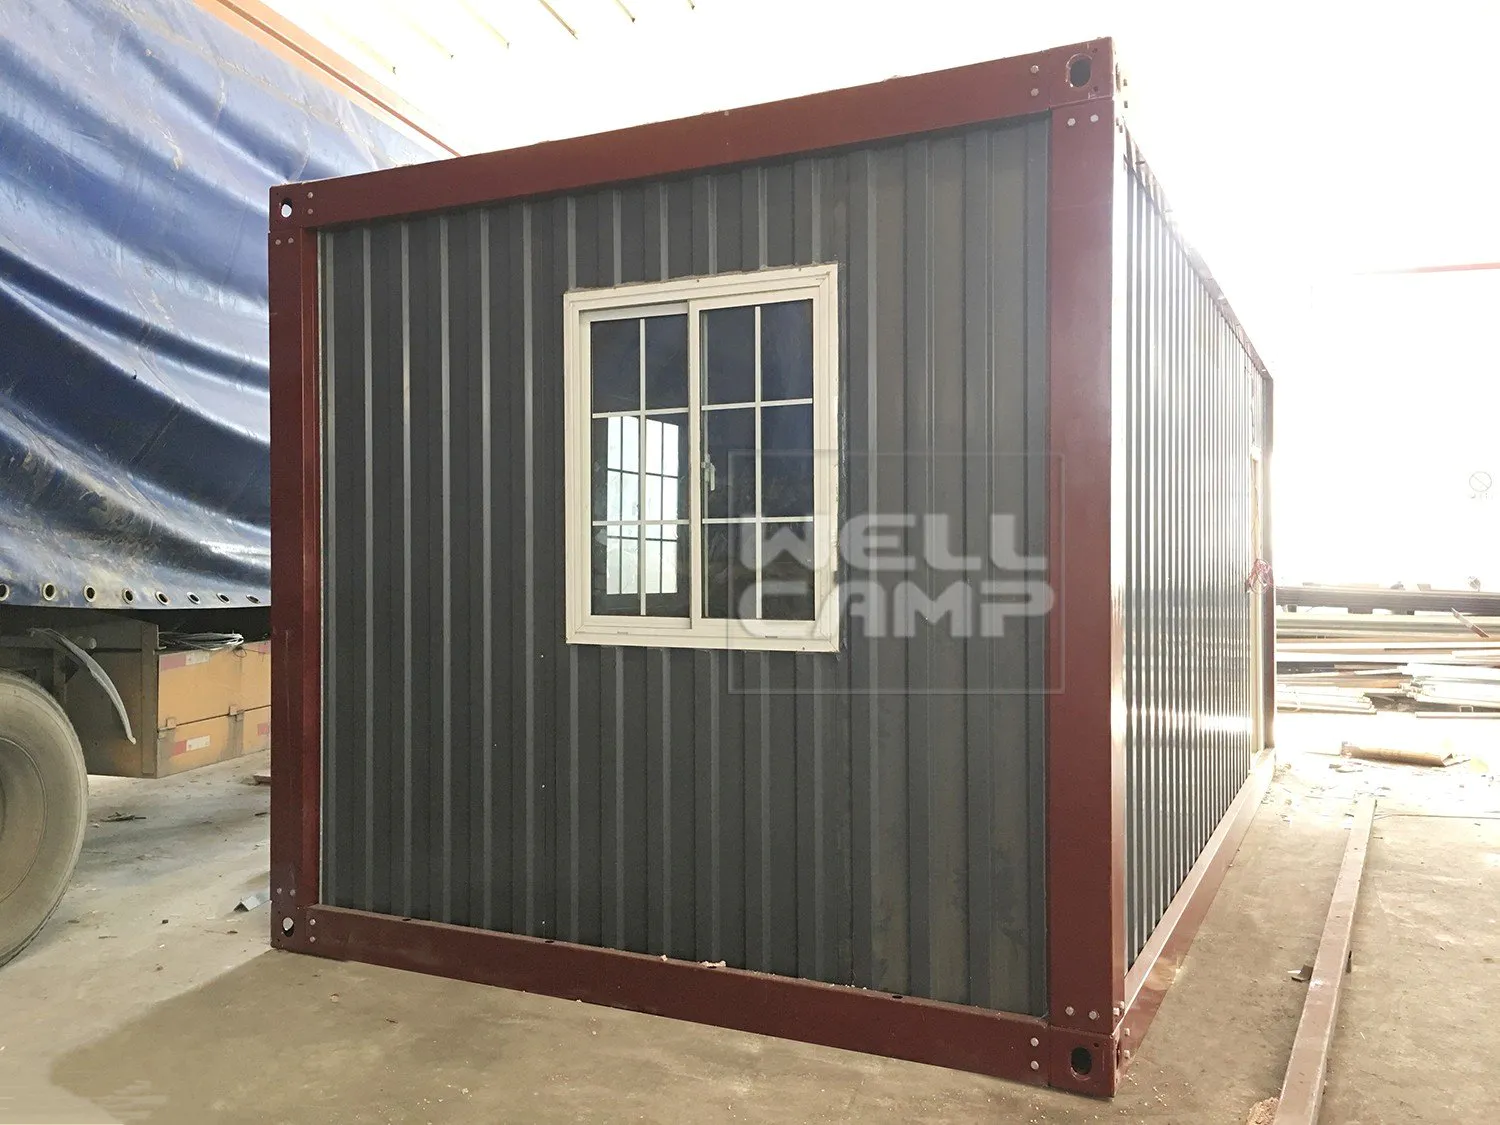 ripple steel container houses wholesale for goods